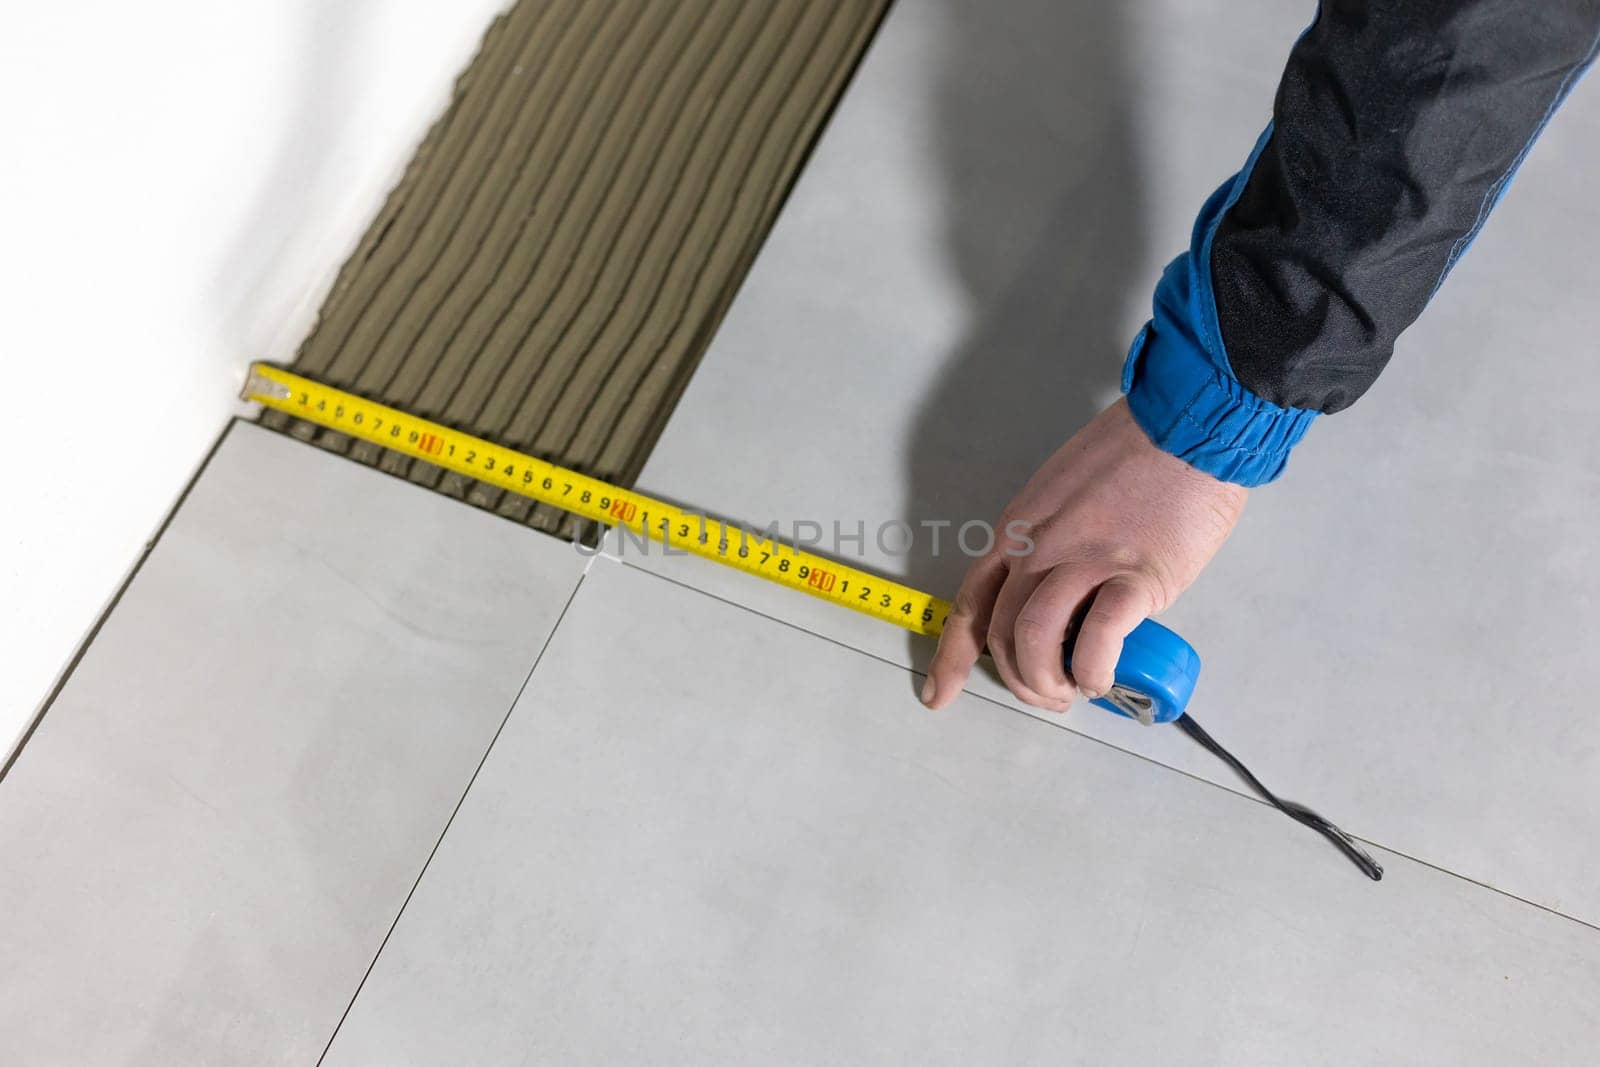 Tiler worker placing or tiling gray ceramic tile in the position over adhesive glue with lash tile leveling system, renovation or recontruction, concept of building by Kadula